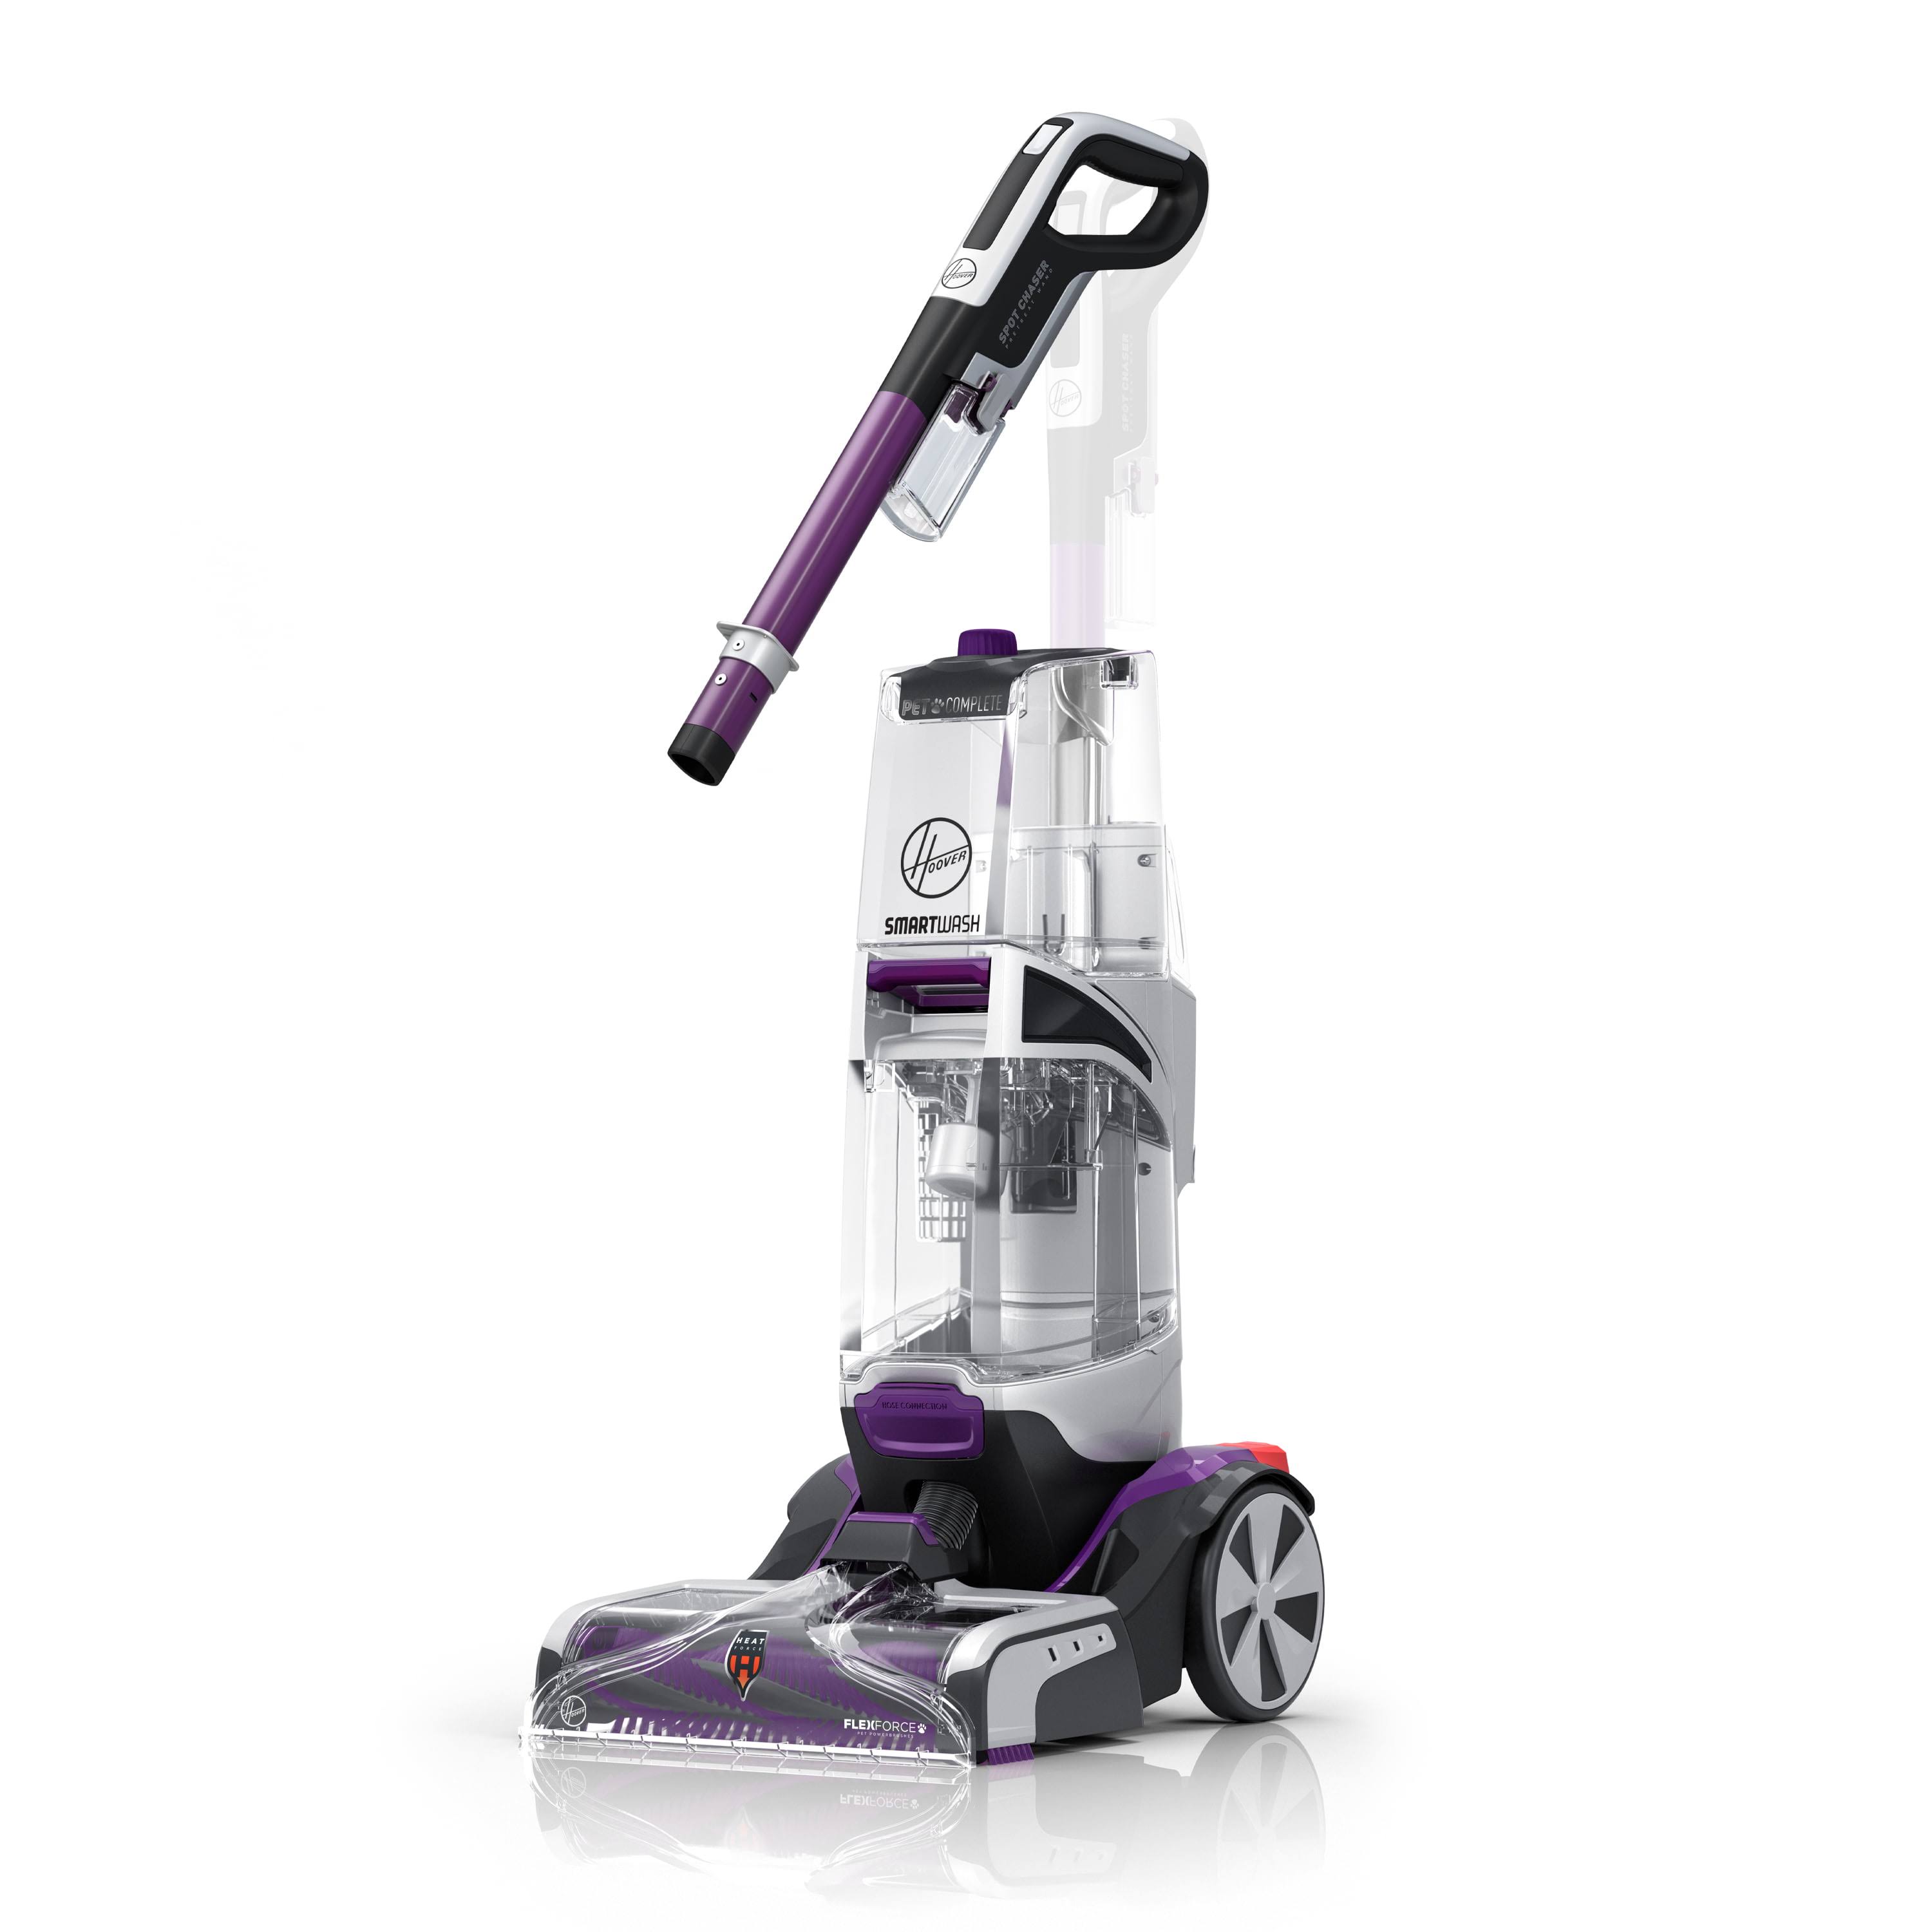 Hoover Smartwash Automatic Carpet Cleaner with Spot Chaser Stain Remover Wand, Shampooer Machine For Pets, FH53000PC, Purple